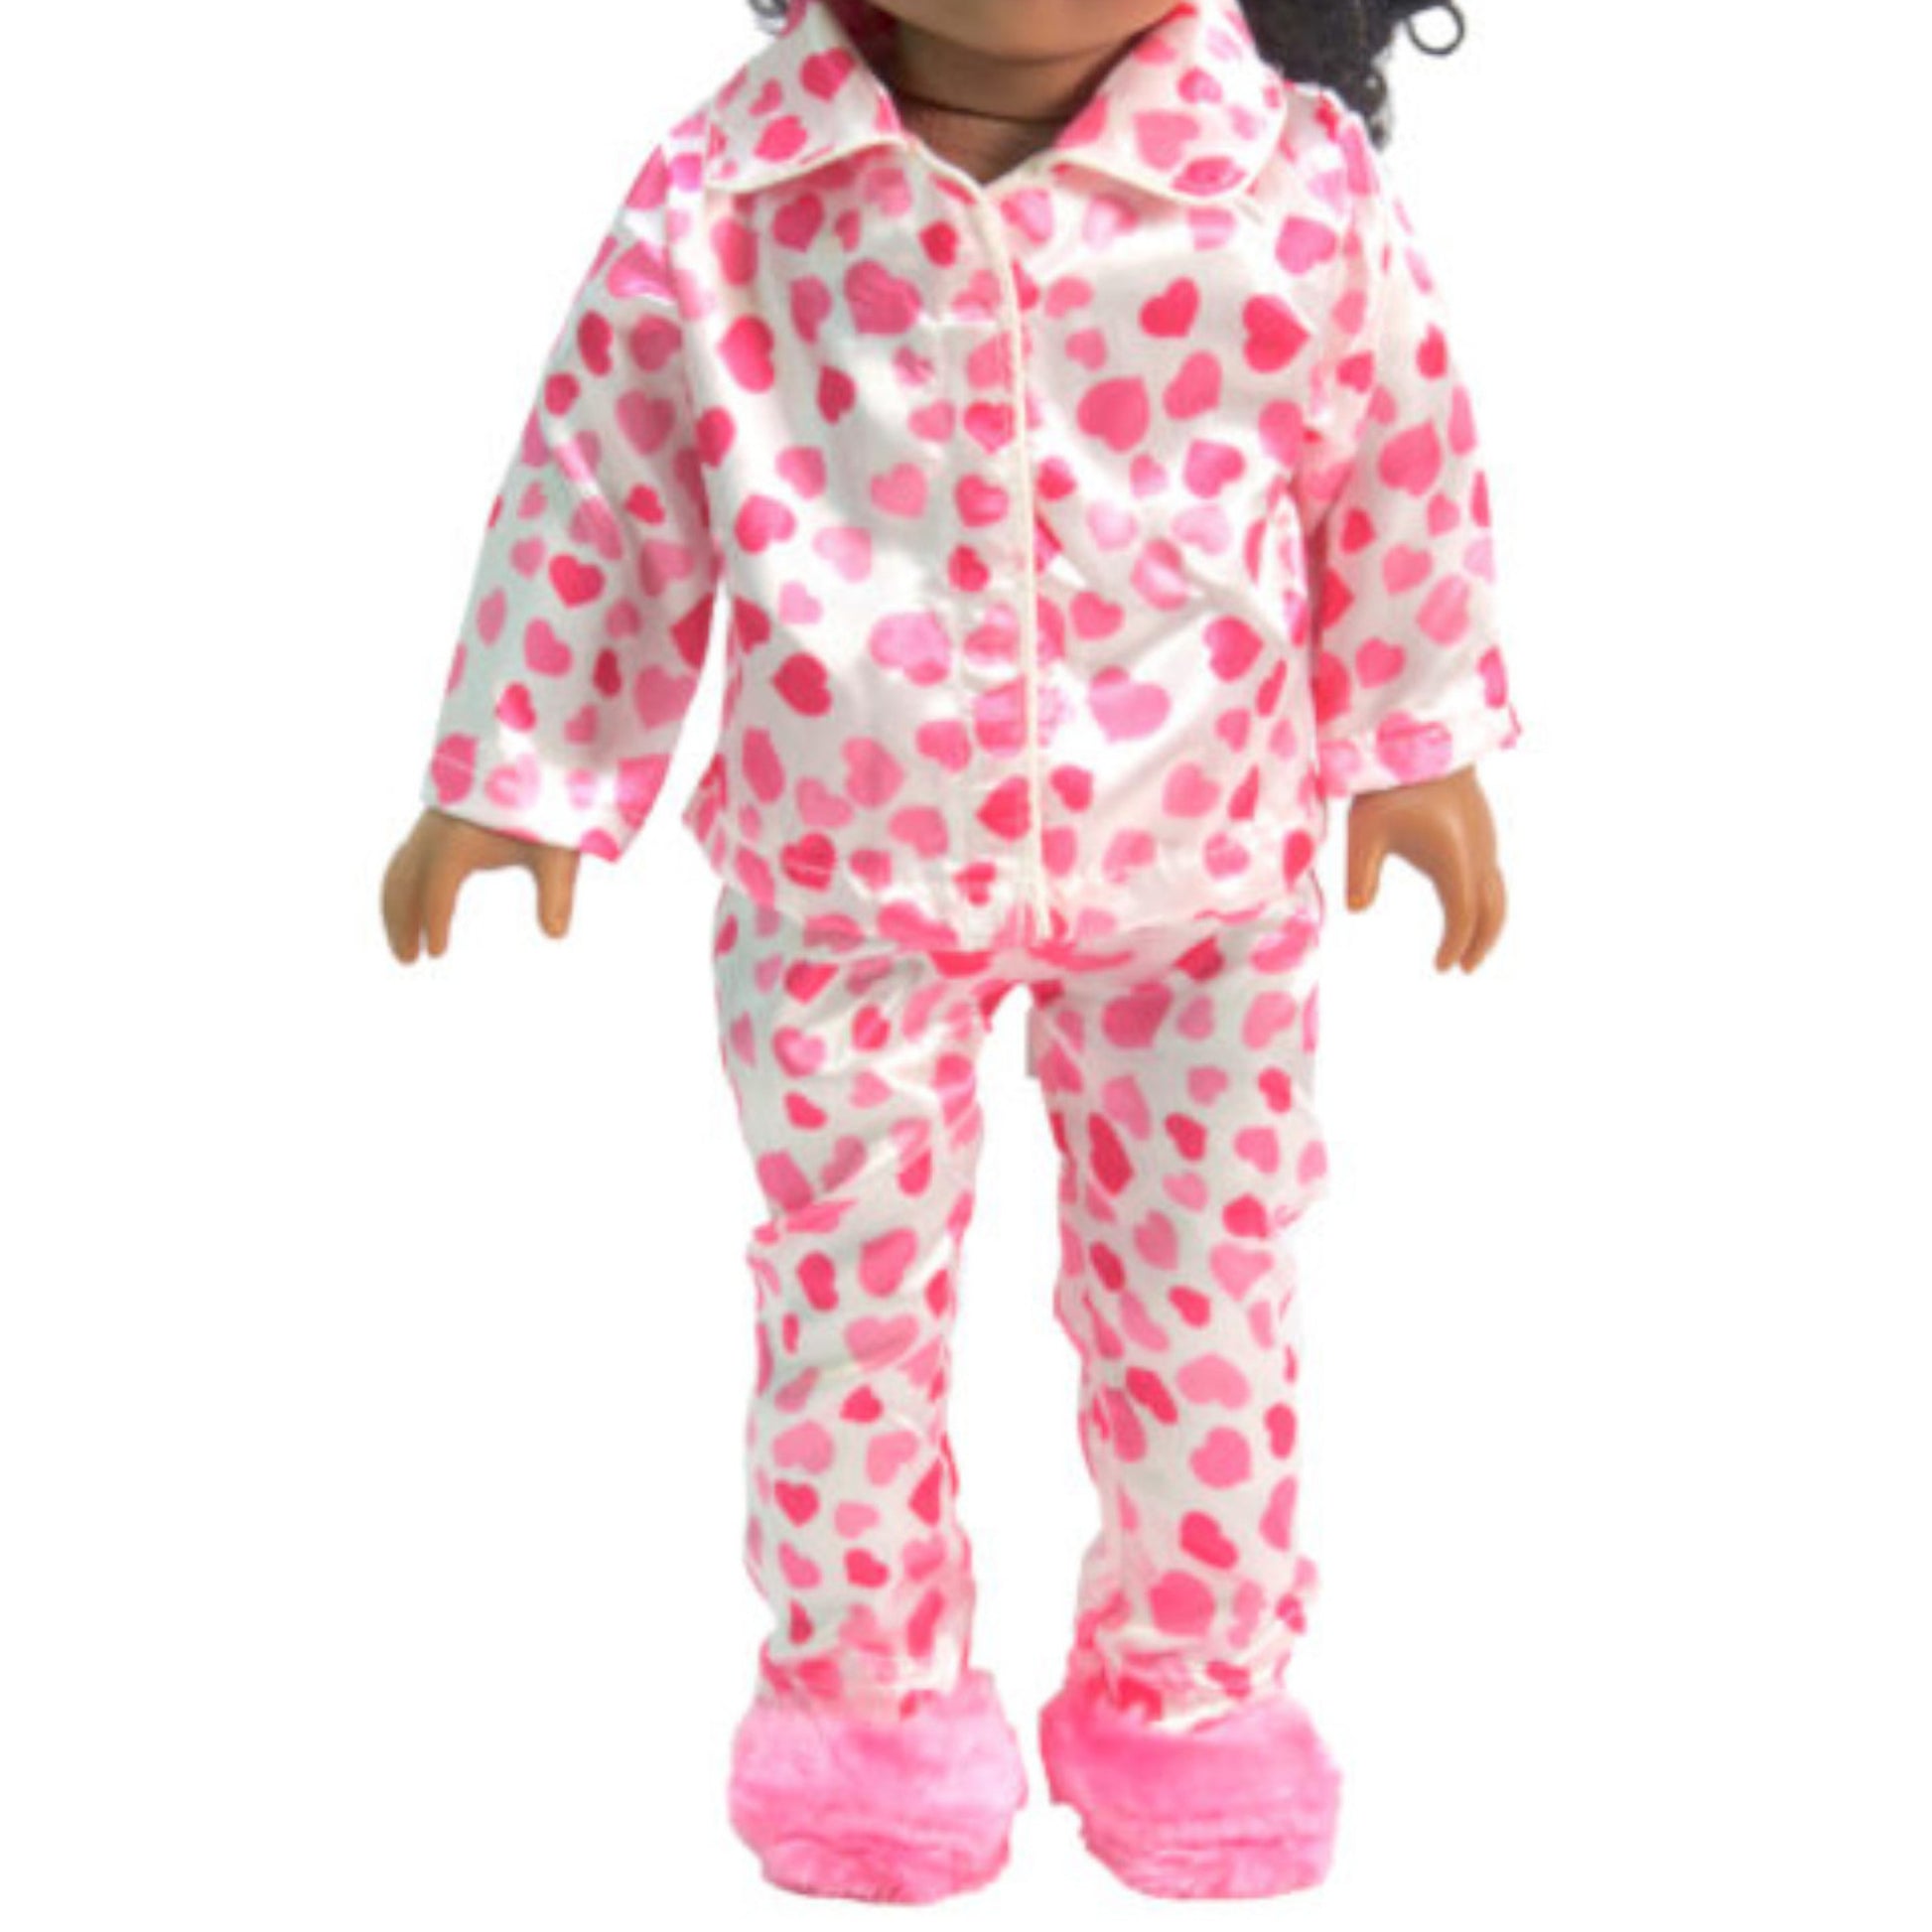 Pink Heart Pajamas for 18-inch dolls with doll